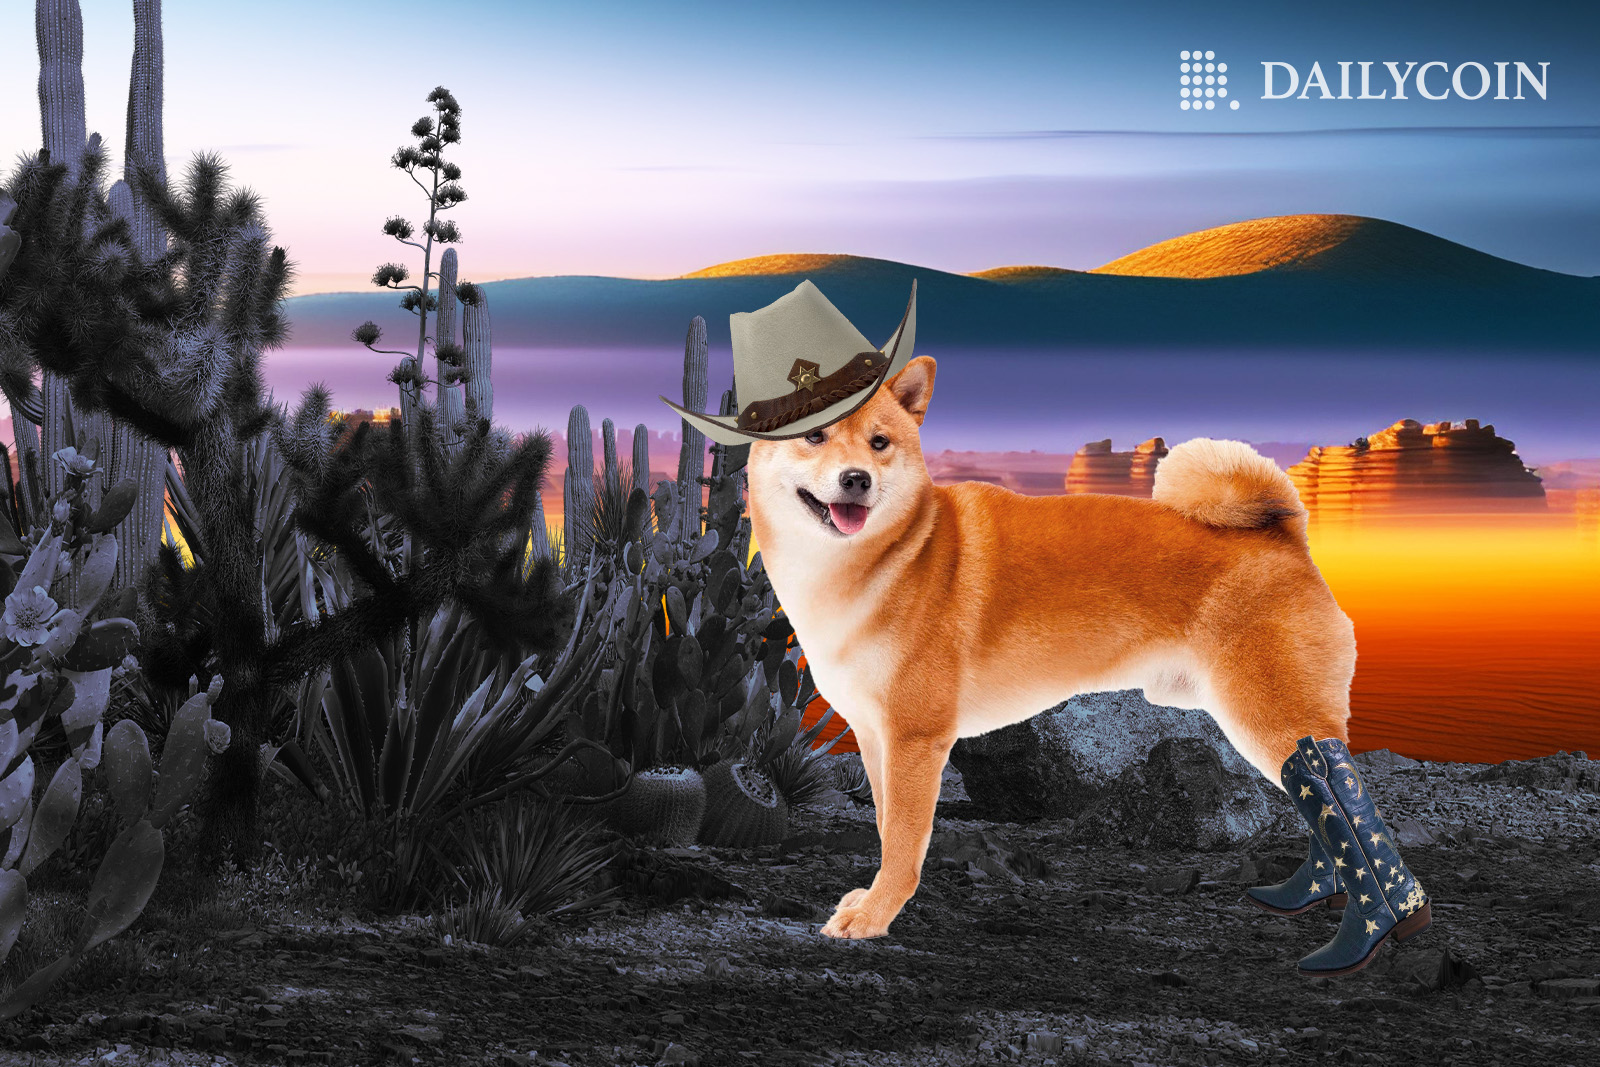 Smiling Shiba Inu dog with a cowboy hat and cowboy boots ready to appear in Austin, Texas.